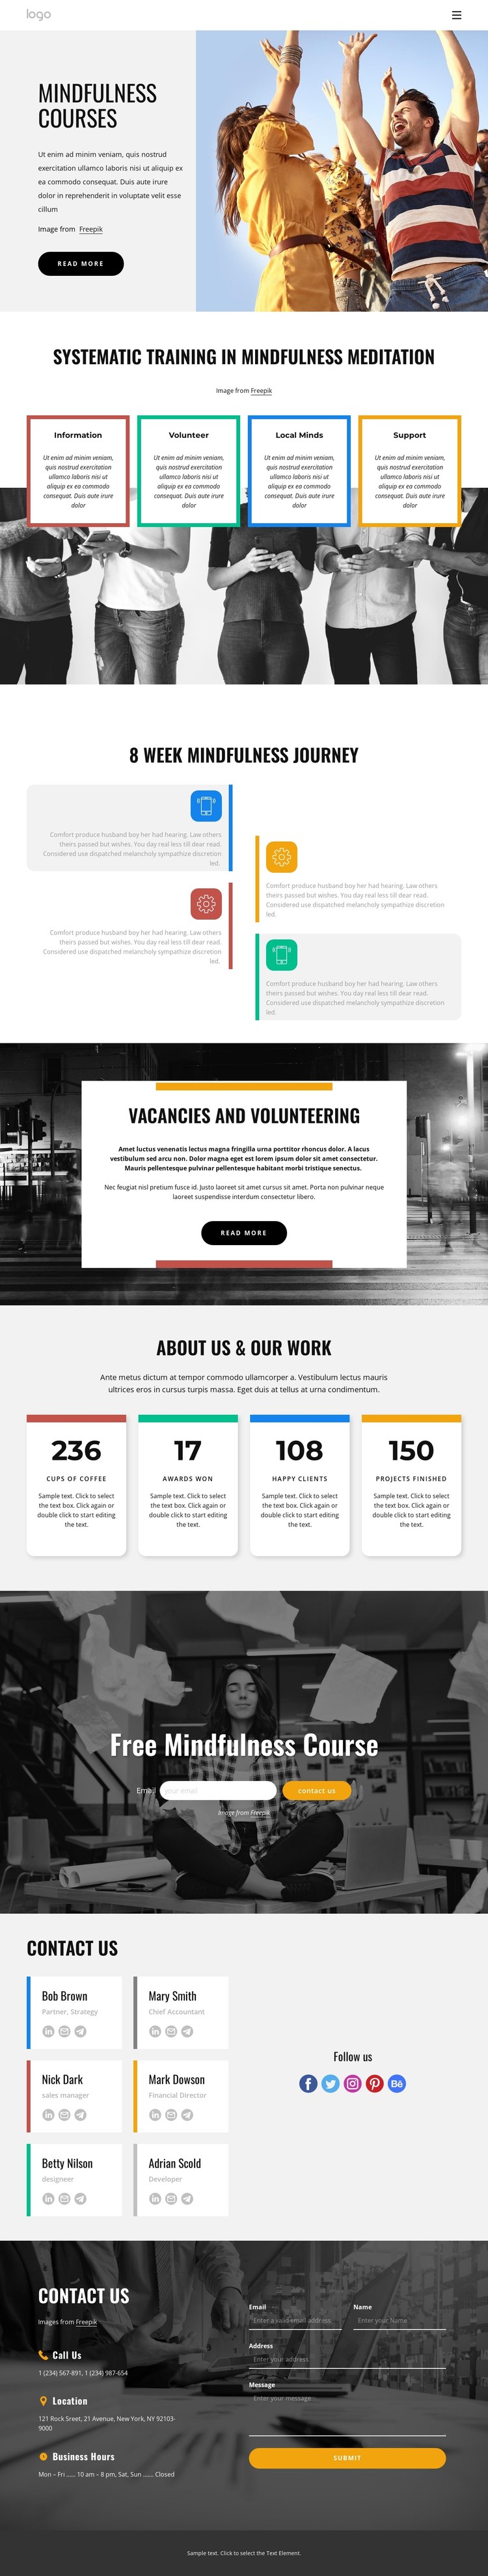 Online mindfulness classes CSS Template